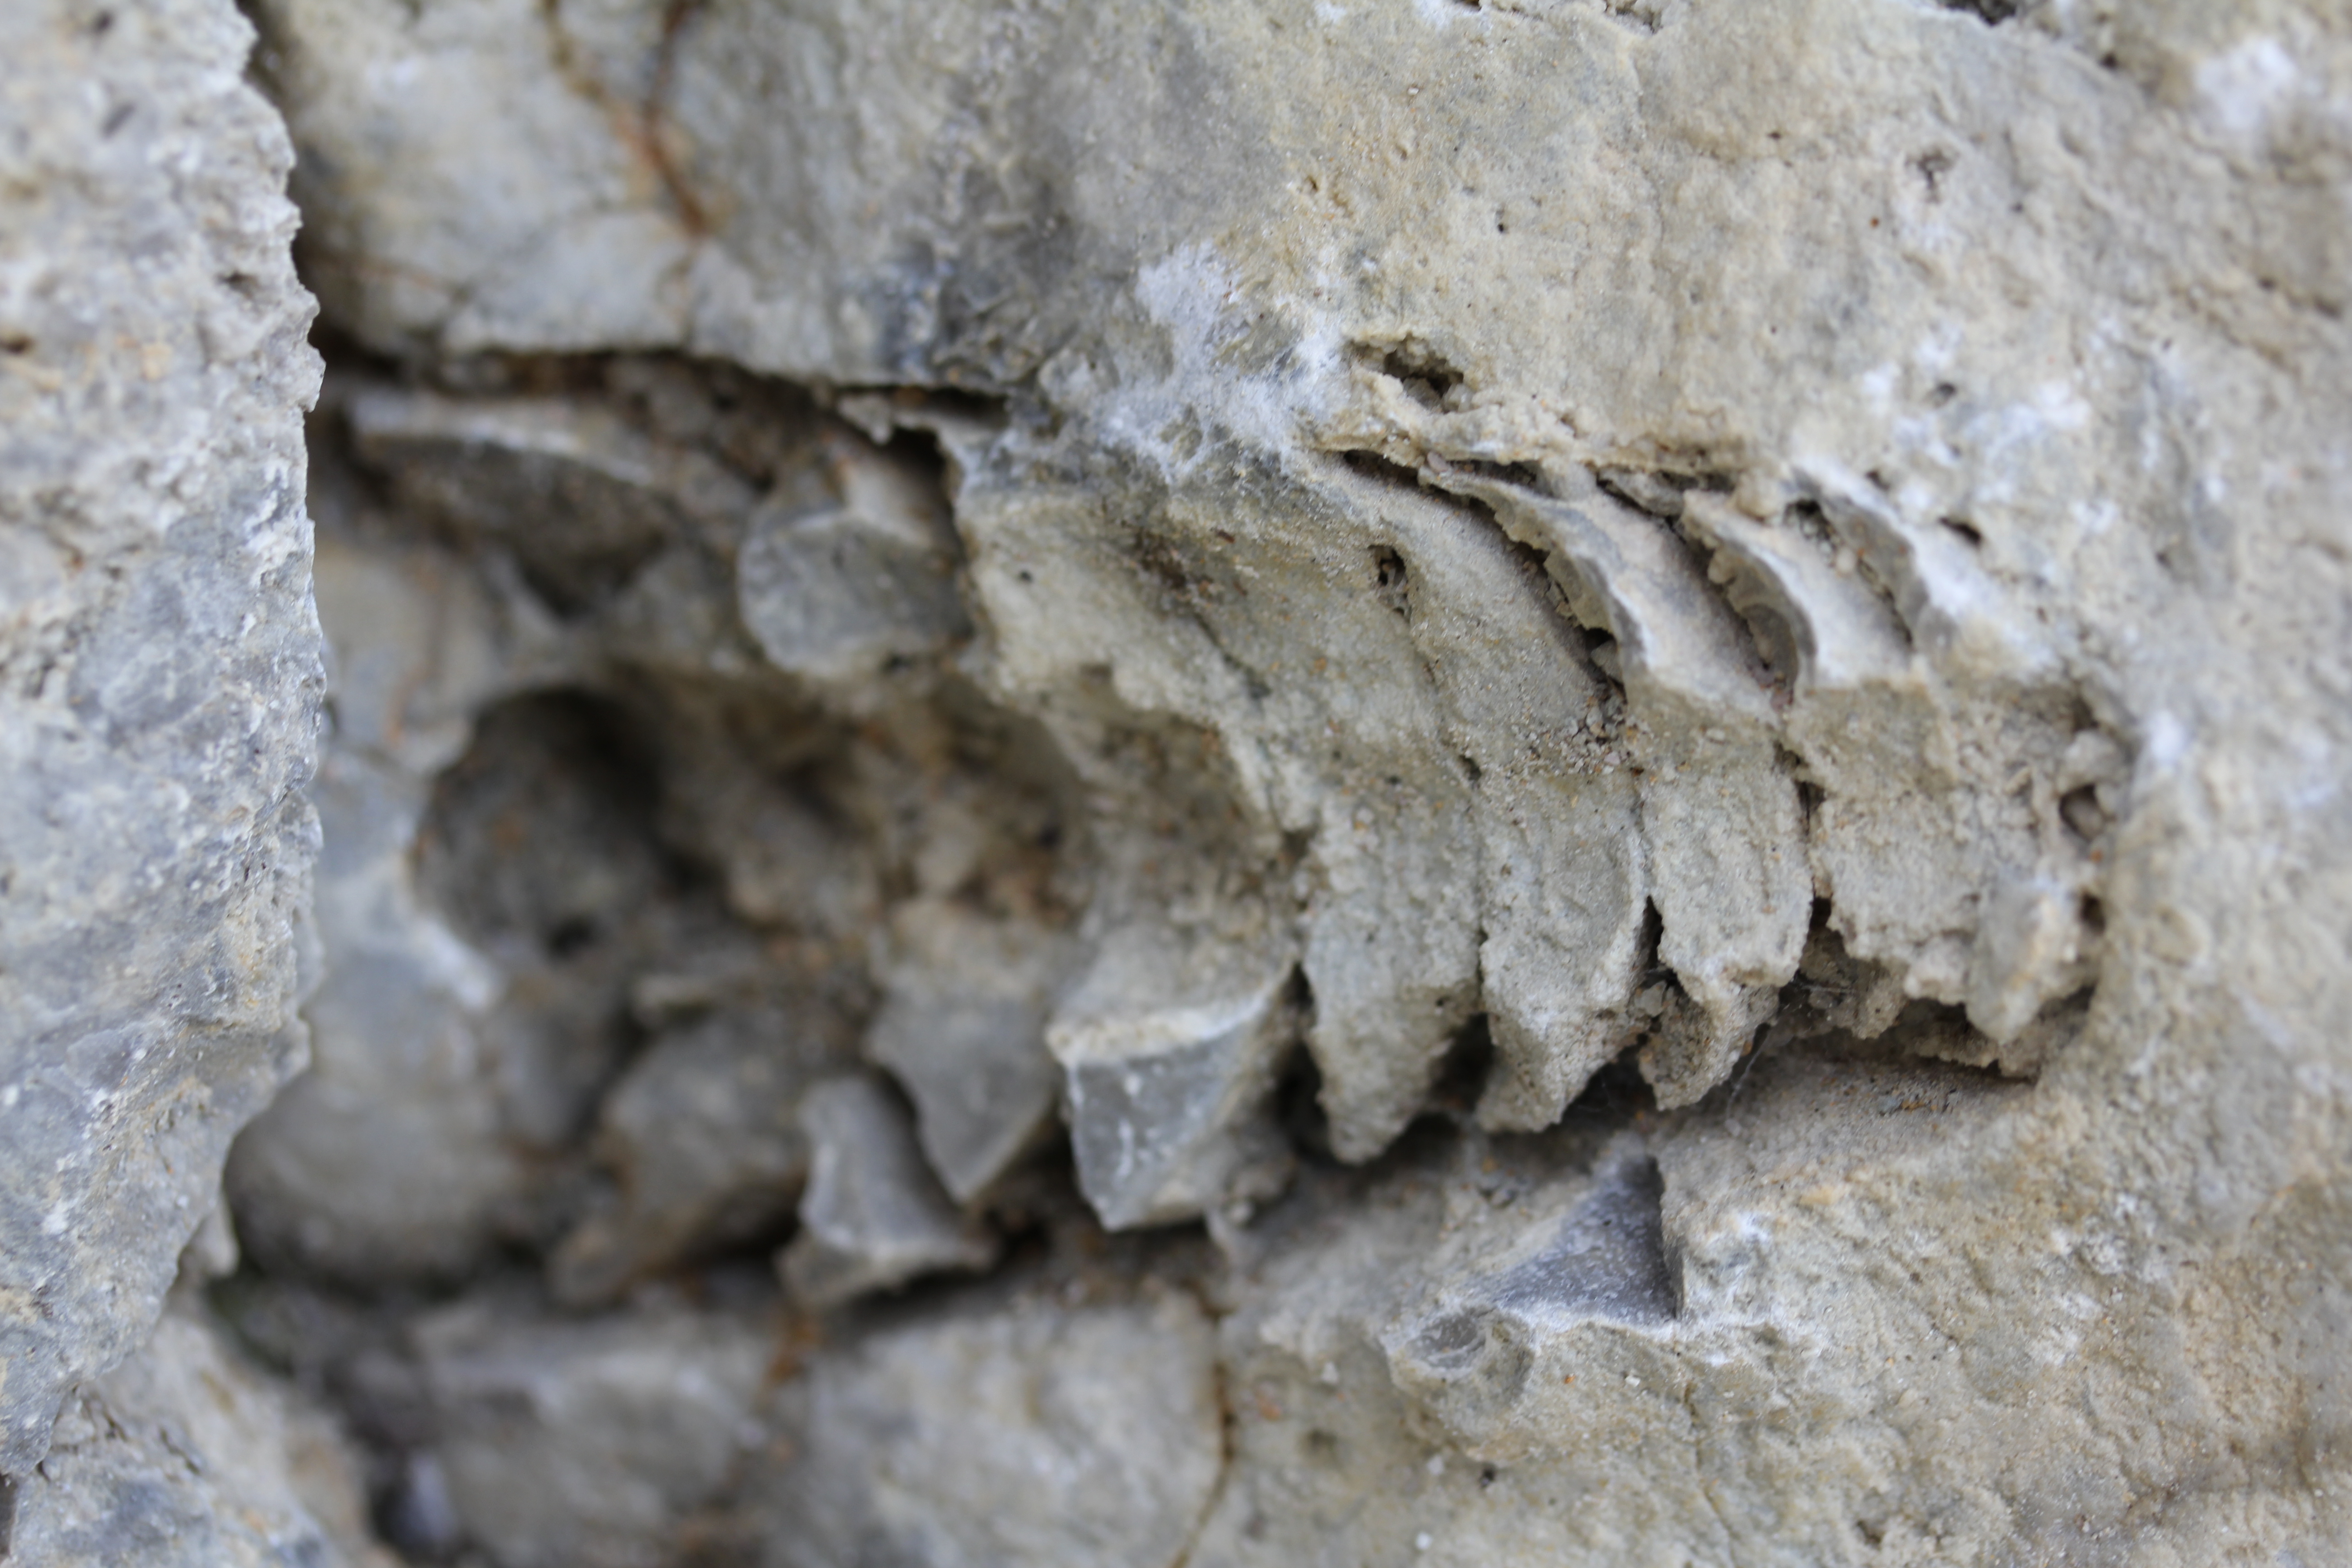 Orthoconic nautiloid cephalopod in Racine Formation at Racine County Quarry Lake Park.